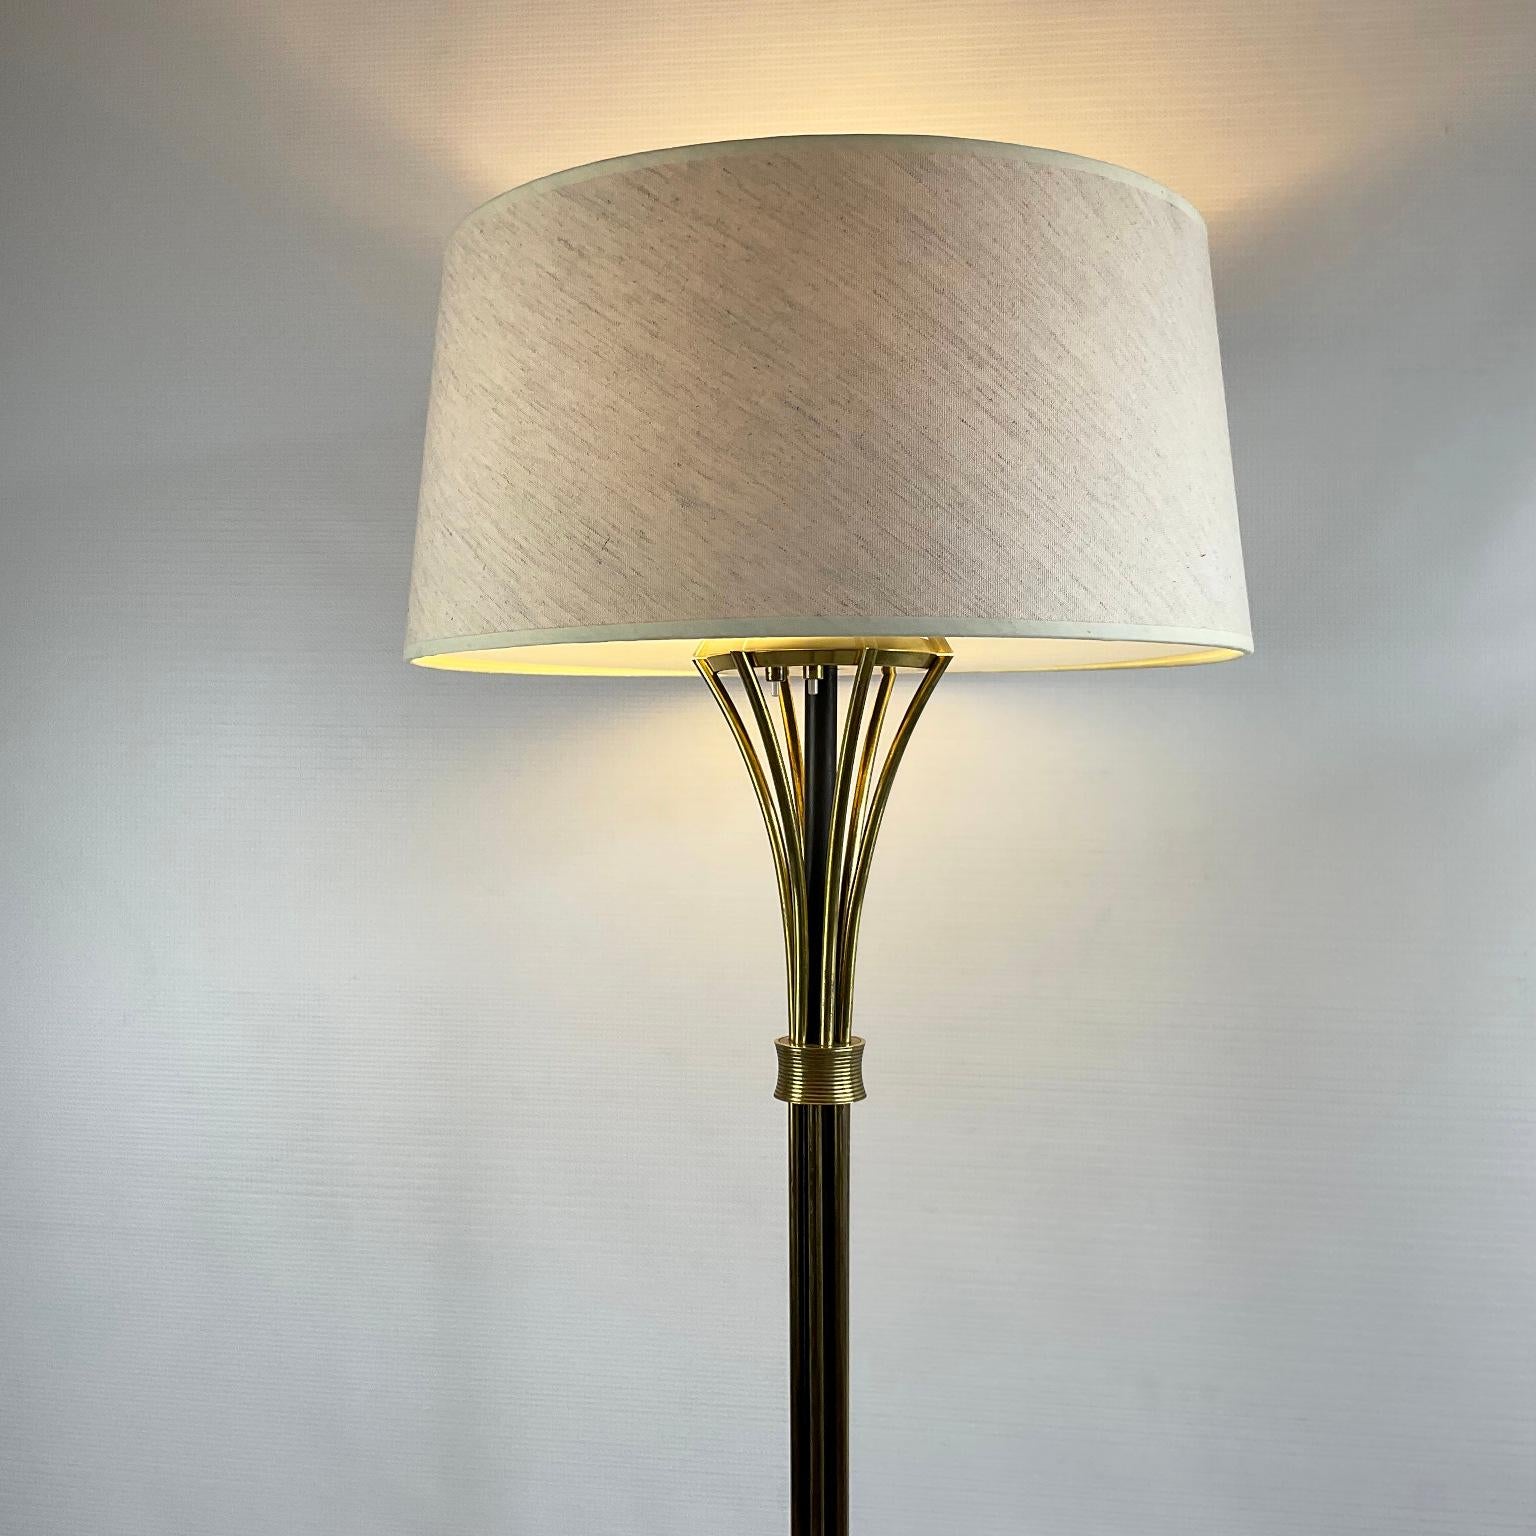 1950s French Floor Lamp Edited by Maison Arlus In Good Condition For Sale In London, GB